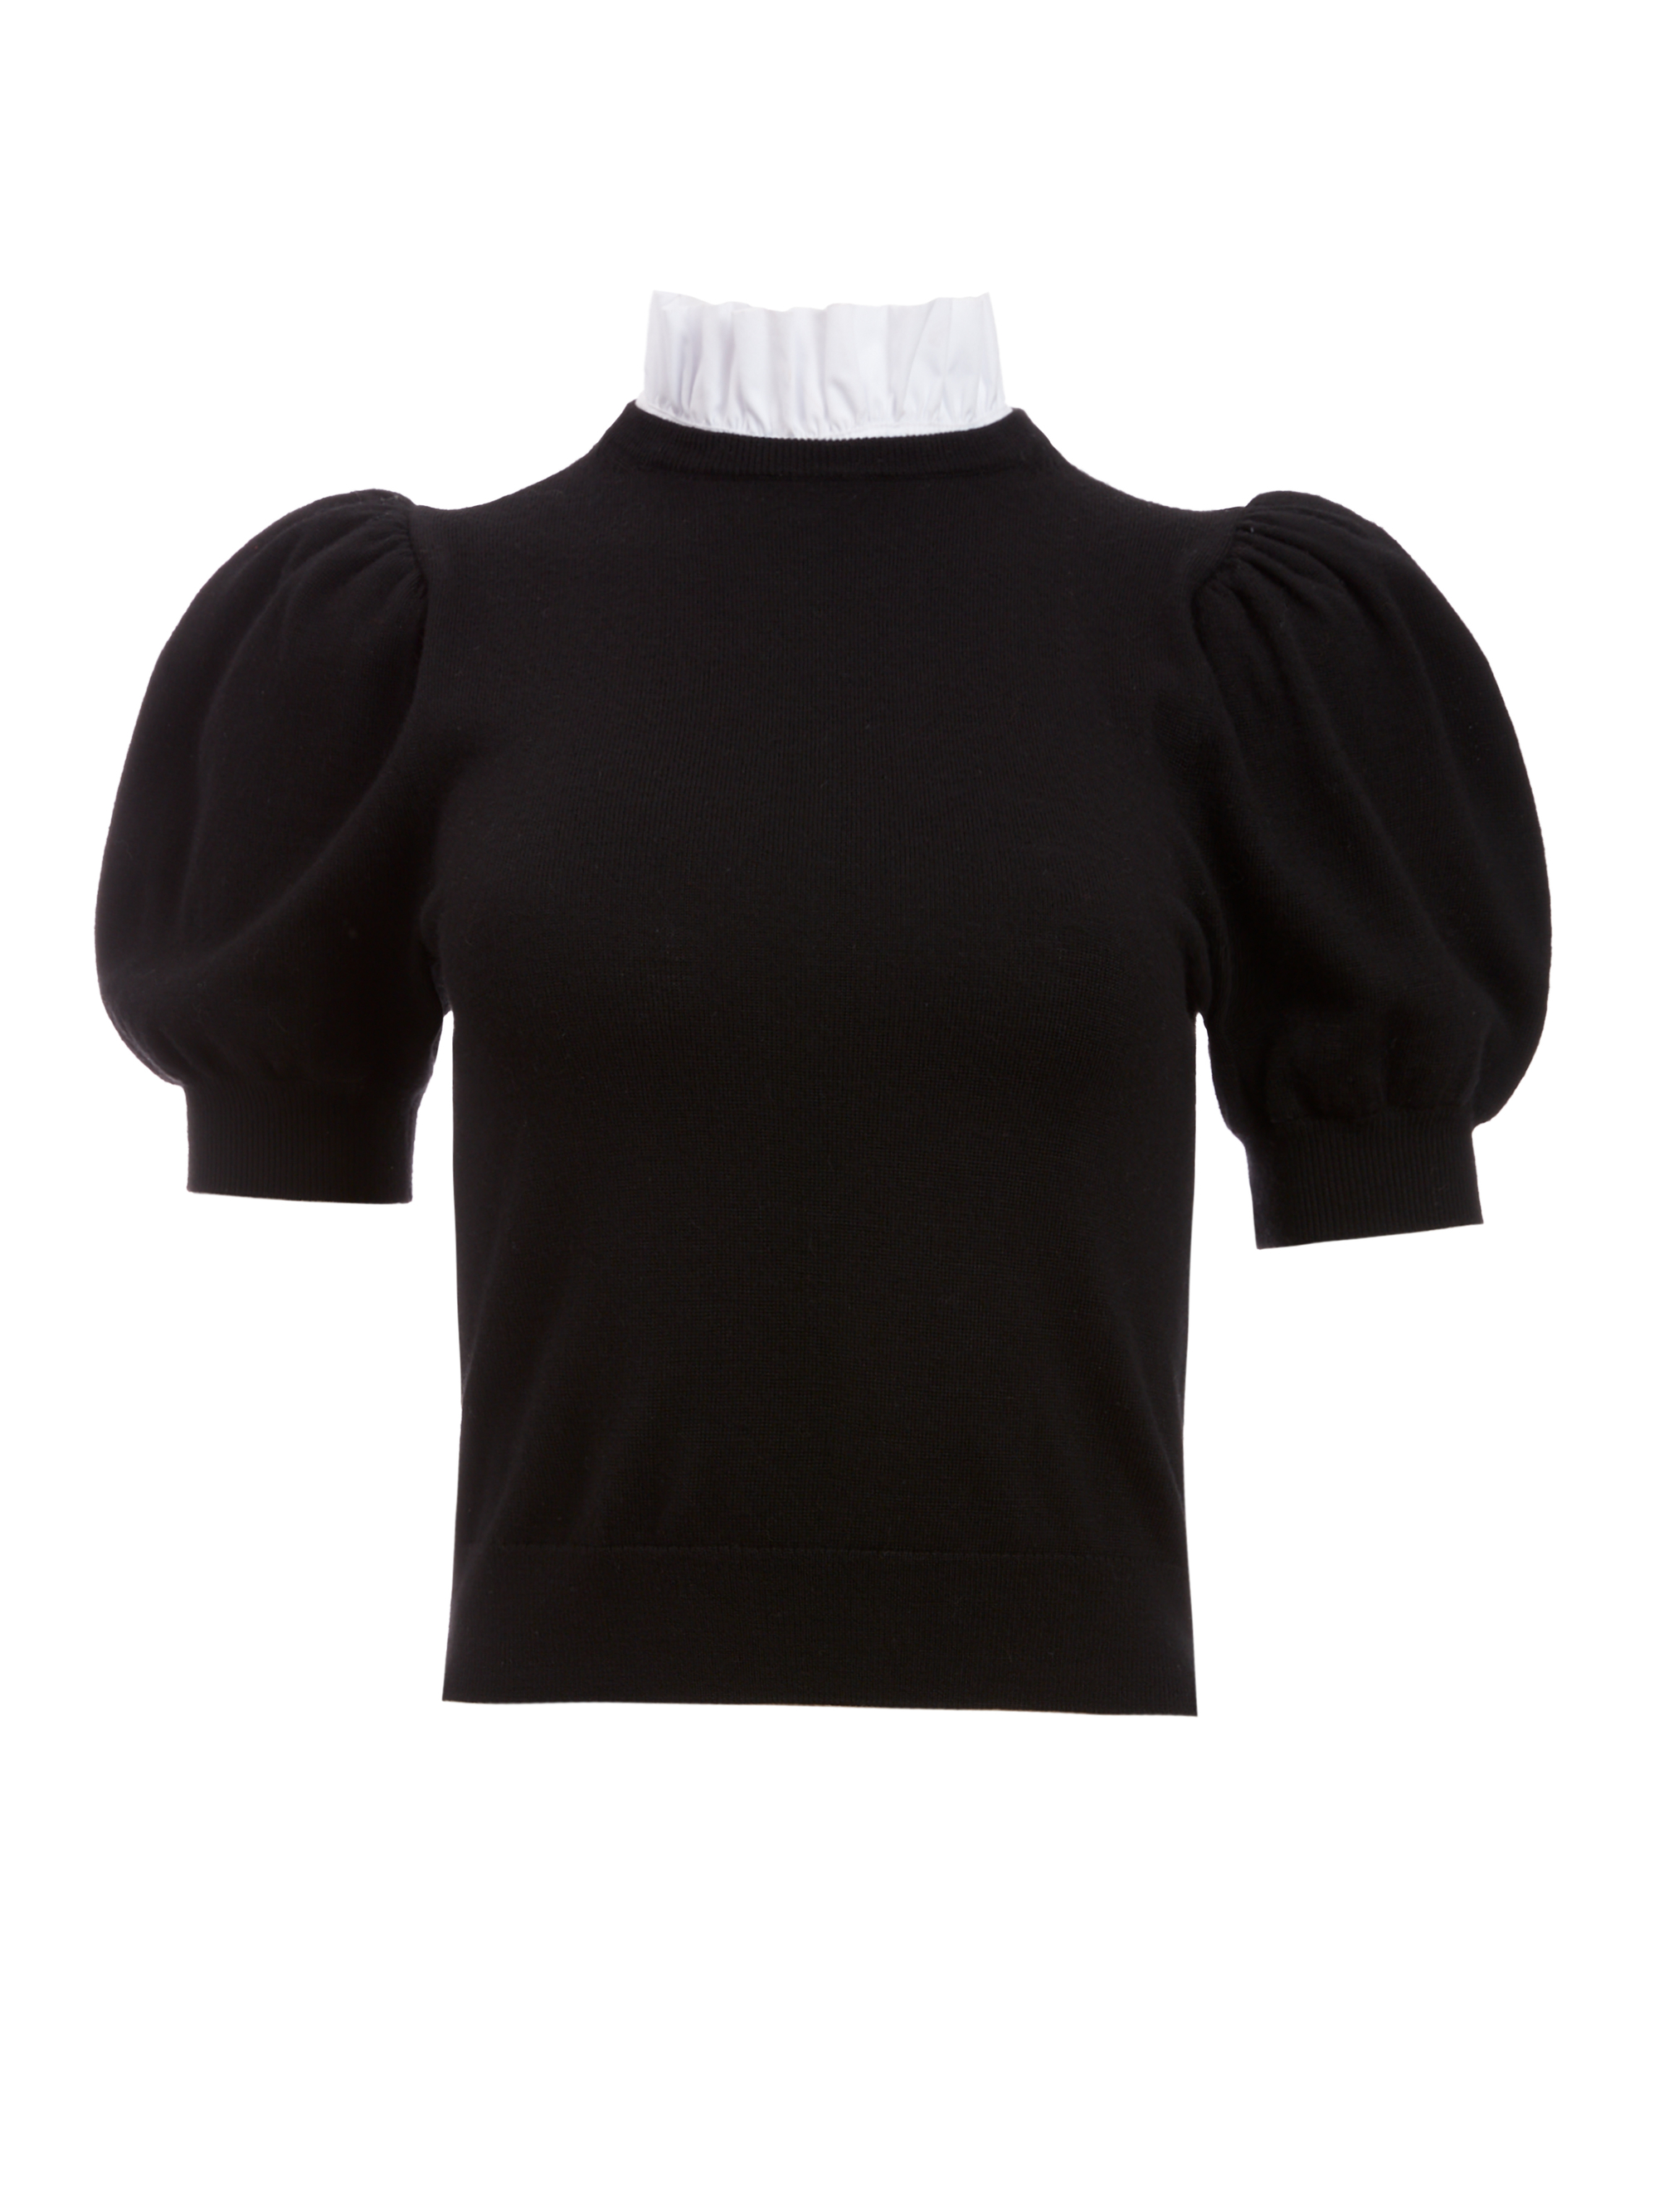 Chase Puff Sleeve Sweater With Collar In Black/white | Alice And Olivia